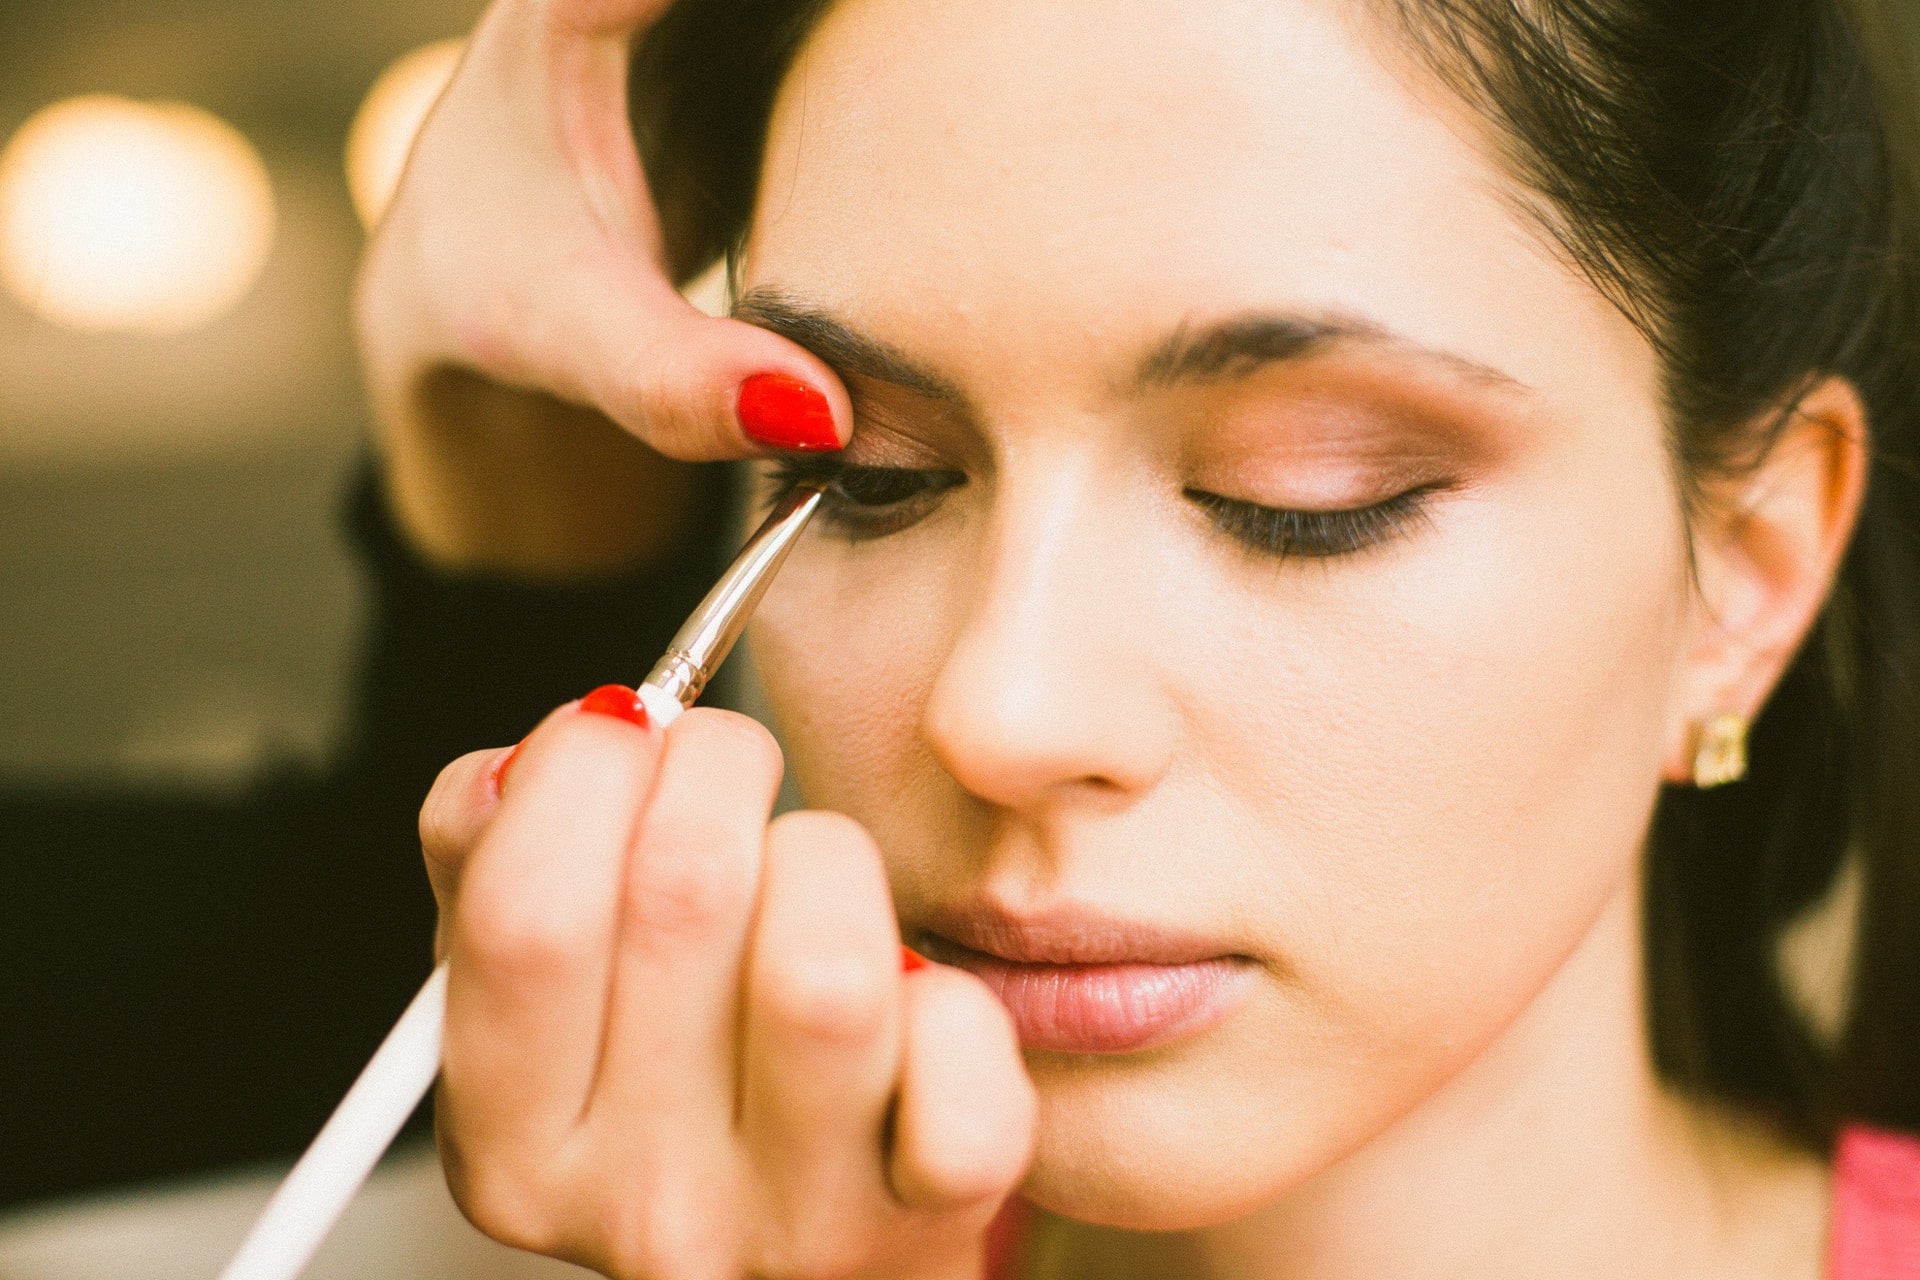 AT WHAT AGE SHOULD YOU WEAR EYELINER?